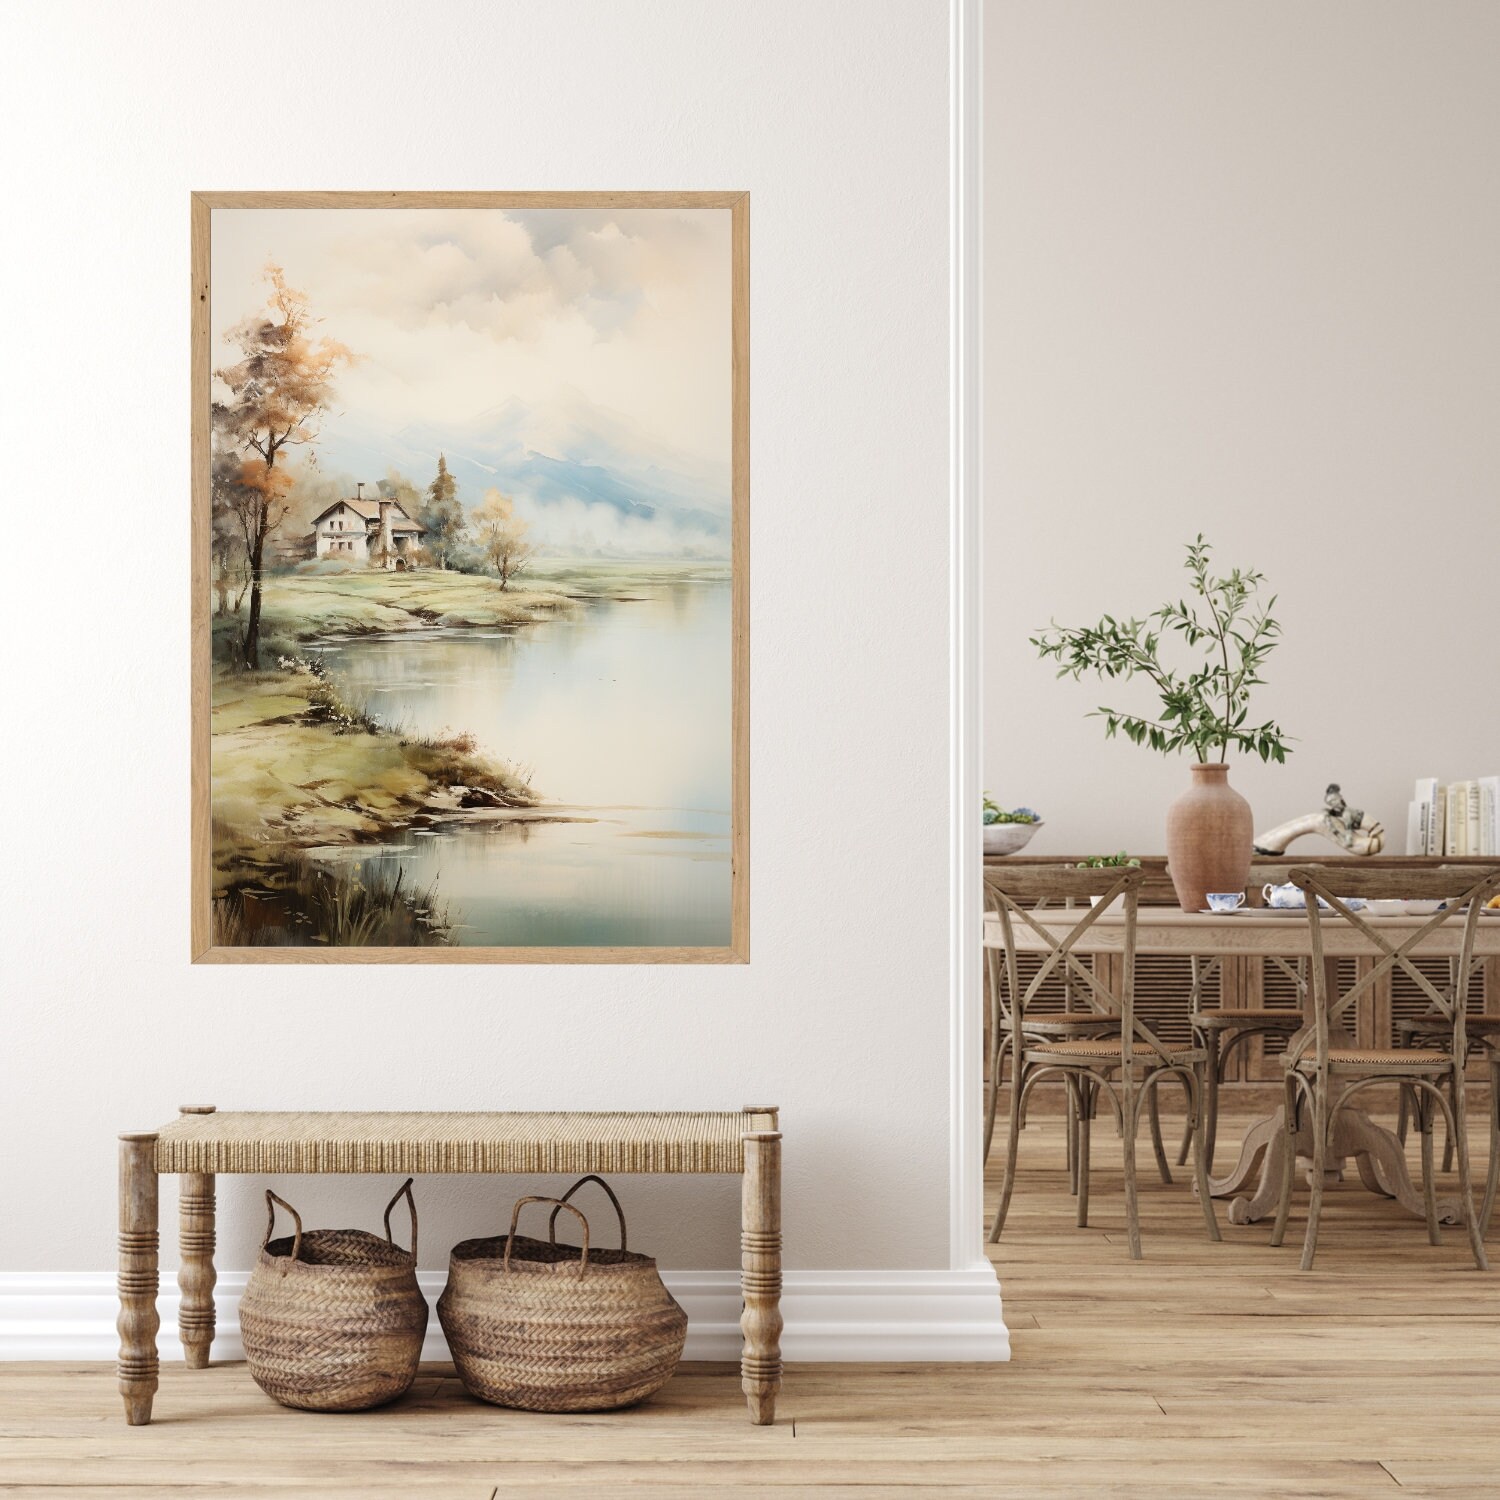 Vintage Wall Art Landscapes Rivers Trees Vintage Wall - Etsy